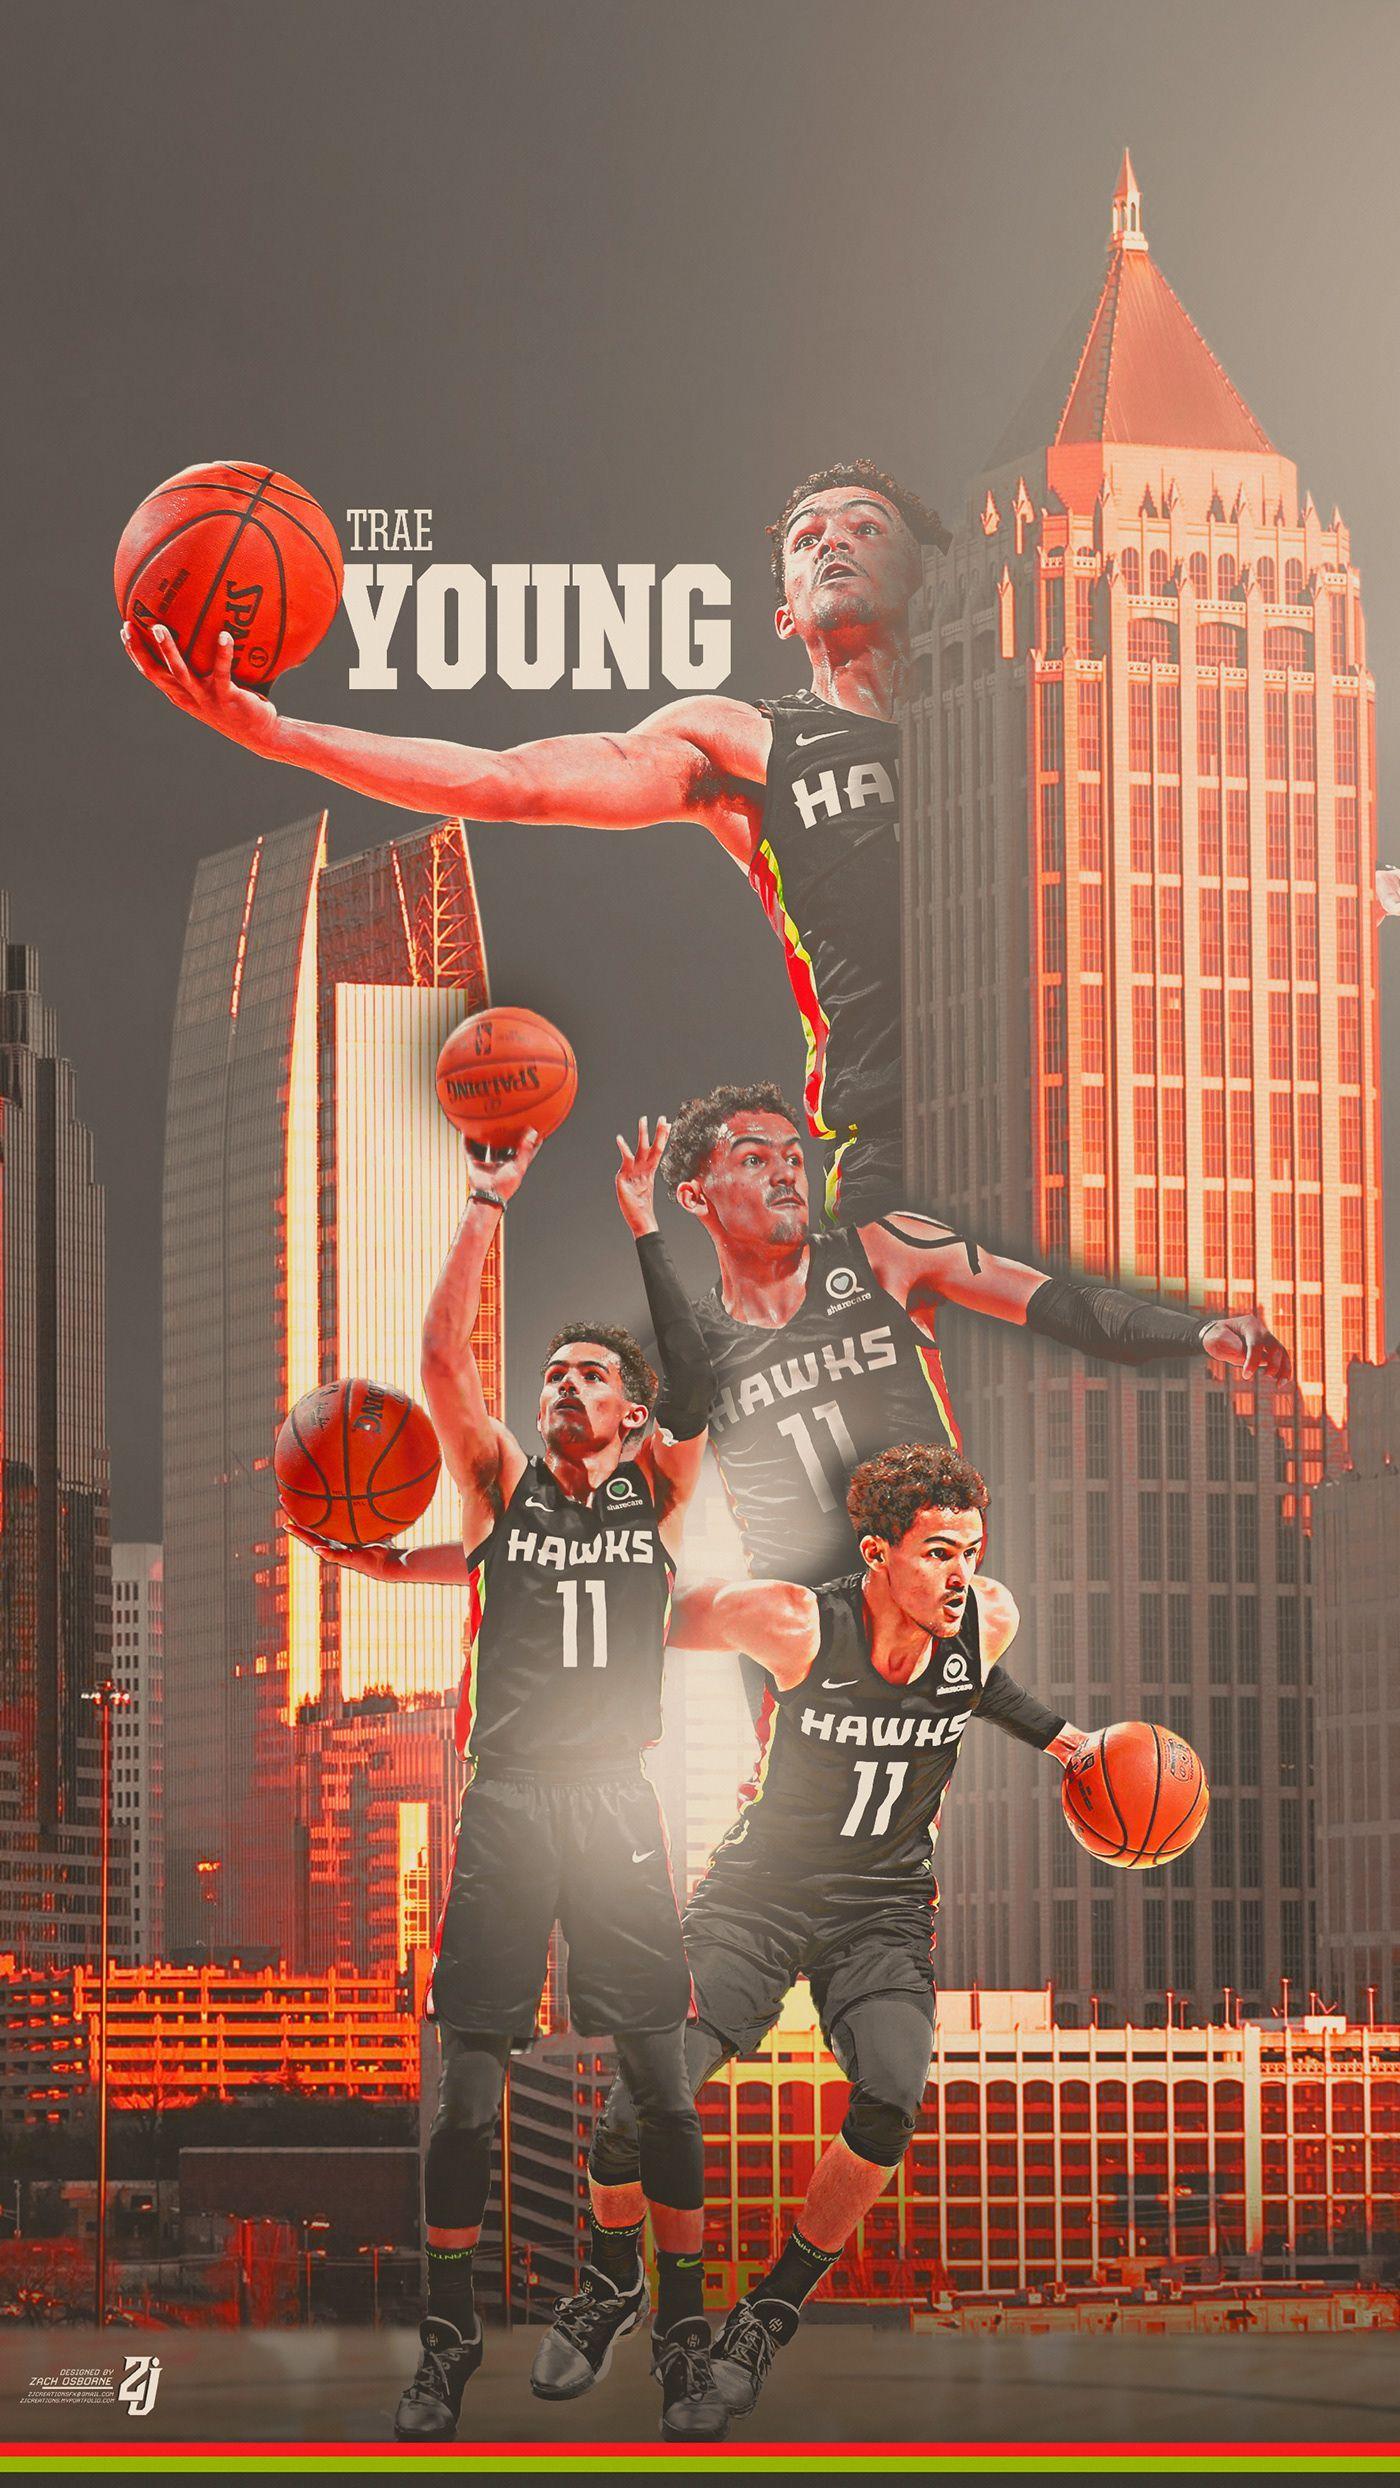 Andy Yung on Instagram A storms coming  traeyoung atlhawks  KeepThatSameEnergy Wallpaper available on my story Watch my latest video  link in my bio